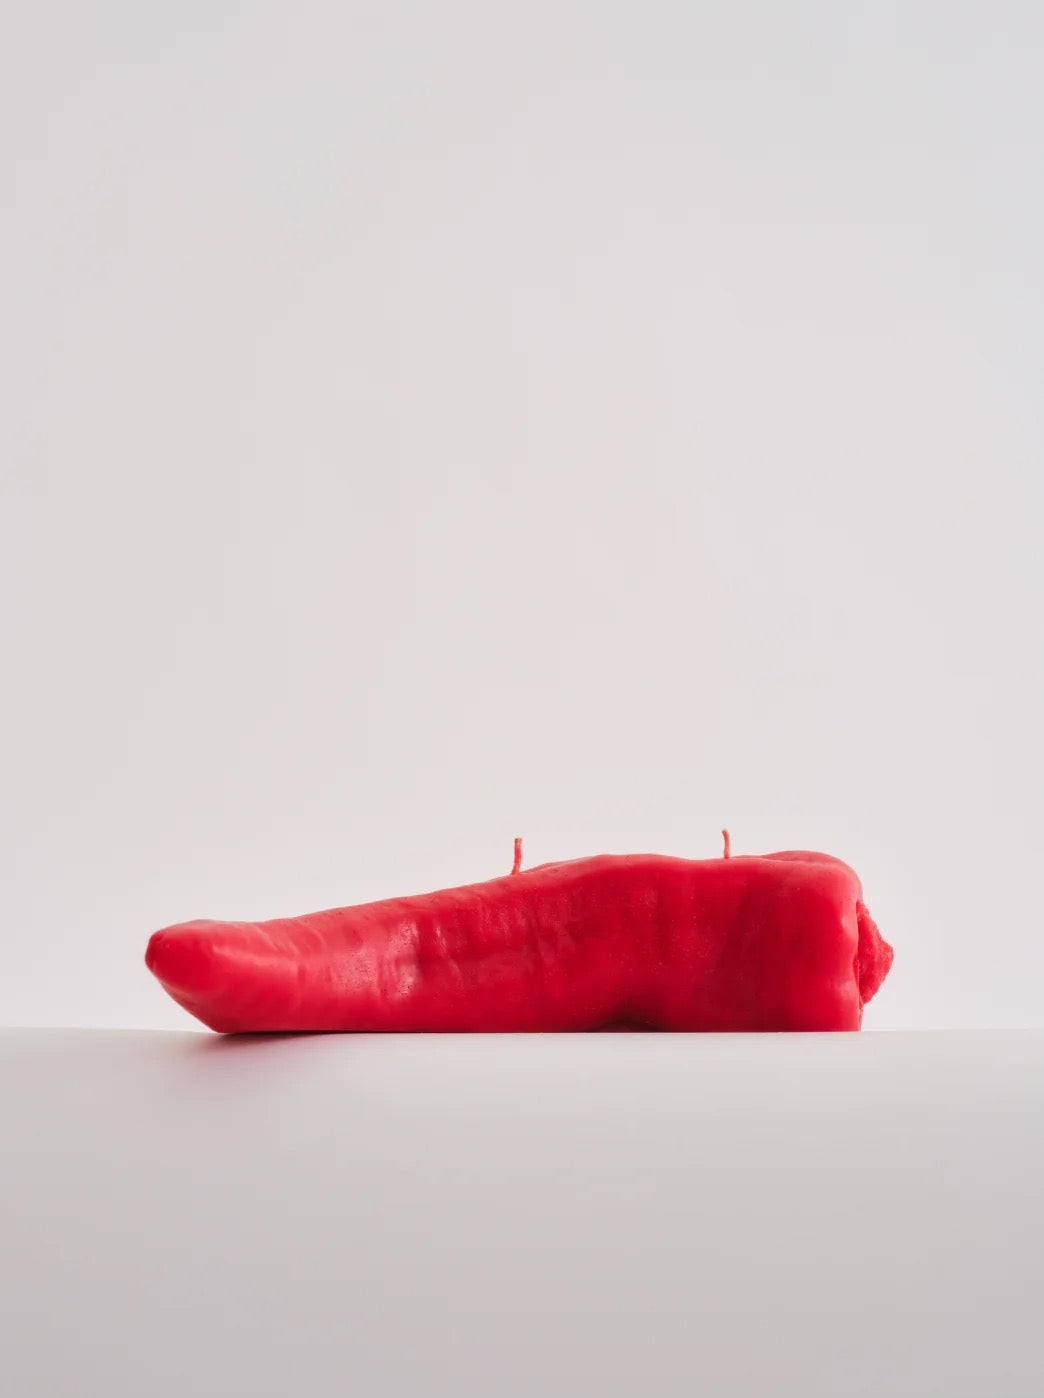 A hand-finished Nonna&#39;s Grocer Red Chilli Candle sitting on top of a white surface.